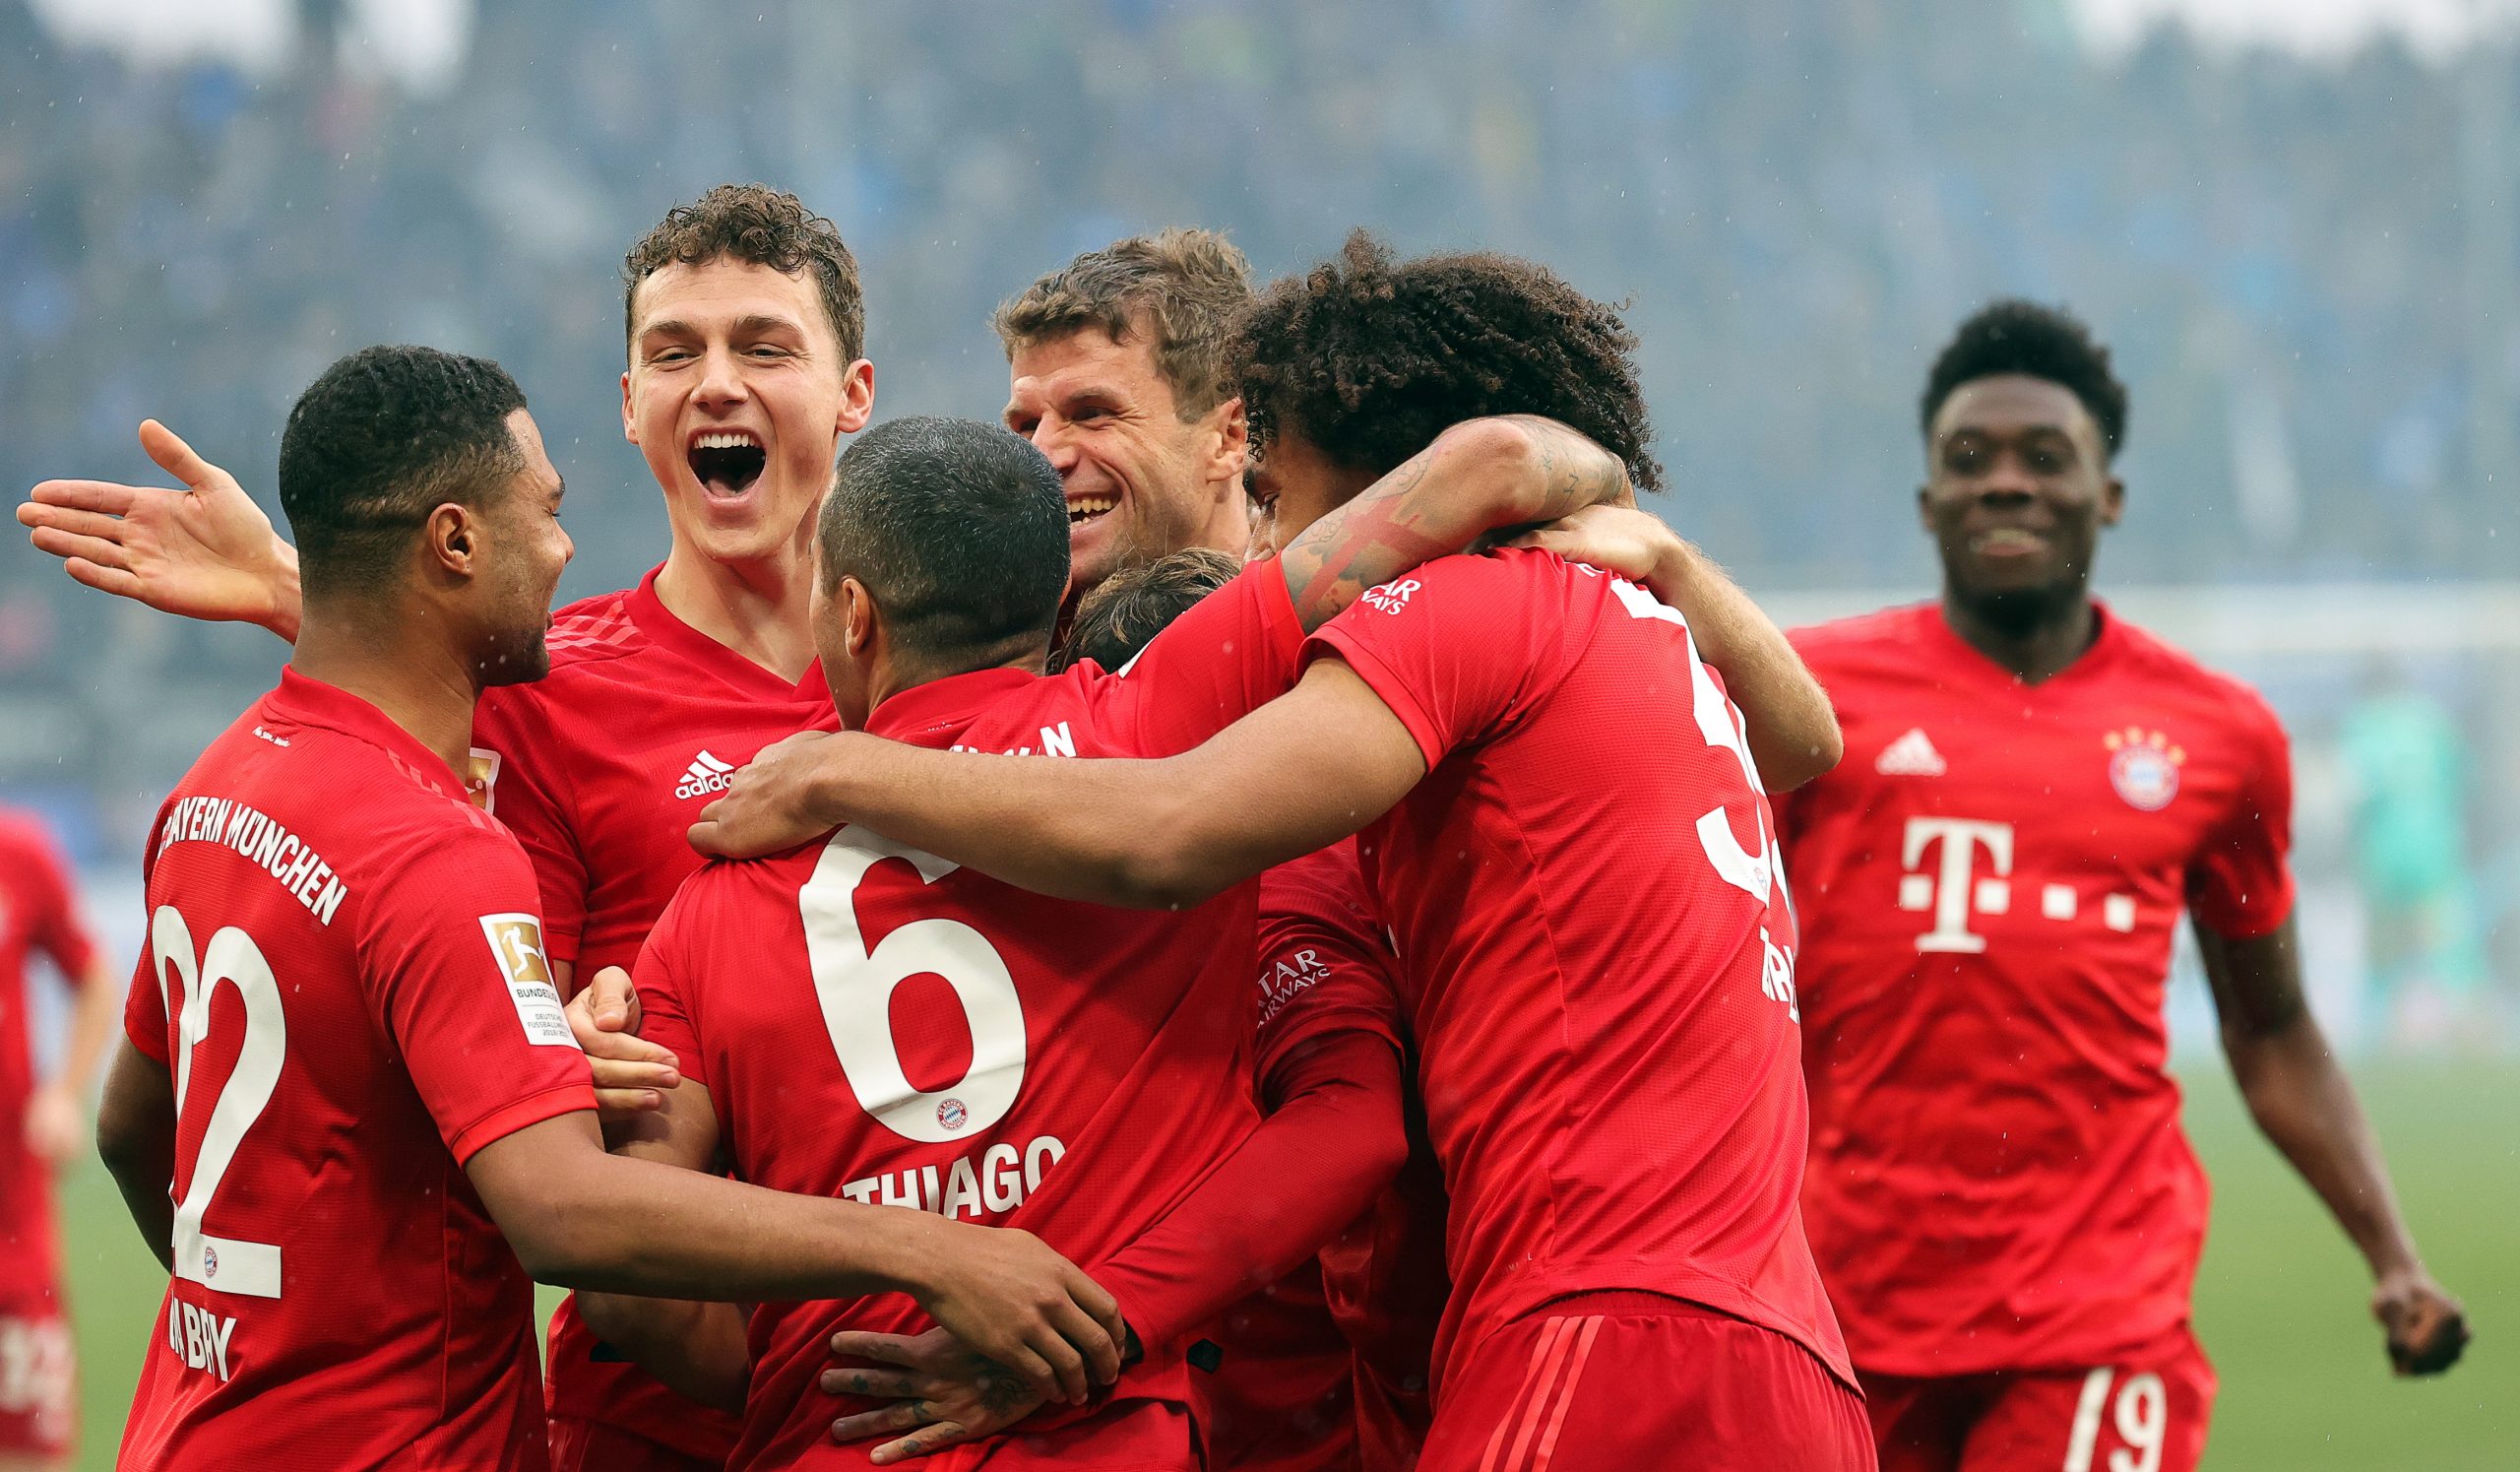 epa08259339 Bayern Munich players celebrate their 5-0 lead during the German Bundesliga soccer match between TSG 1899 Hoffenheim and Bayern Munich in Sinsheim, Germany, 29 February 2020.  EPA/ARMANDO BABANI CONDITIONS - ATTENTION: The DFL regulations prohibit any use of photographs as image sequences and/or quasi-video.